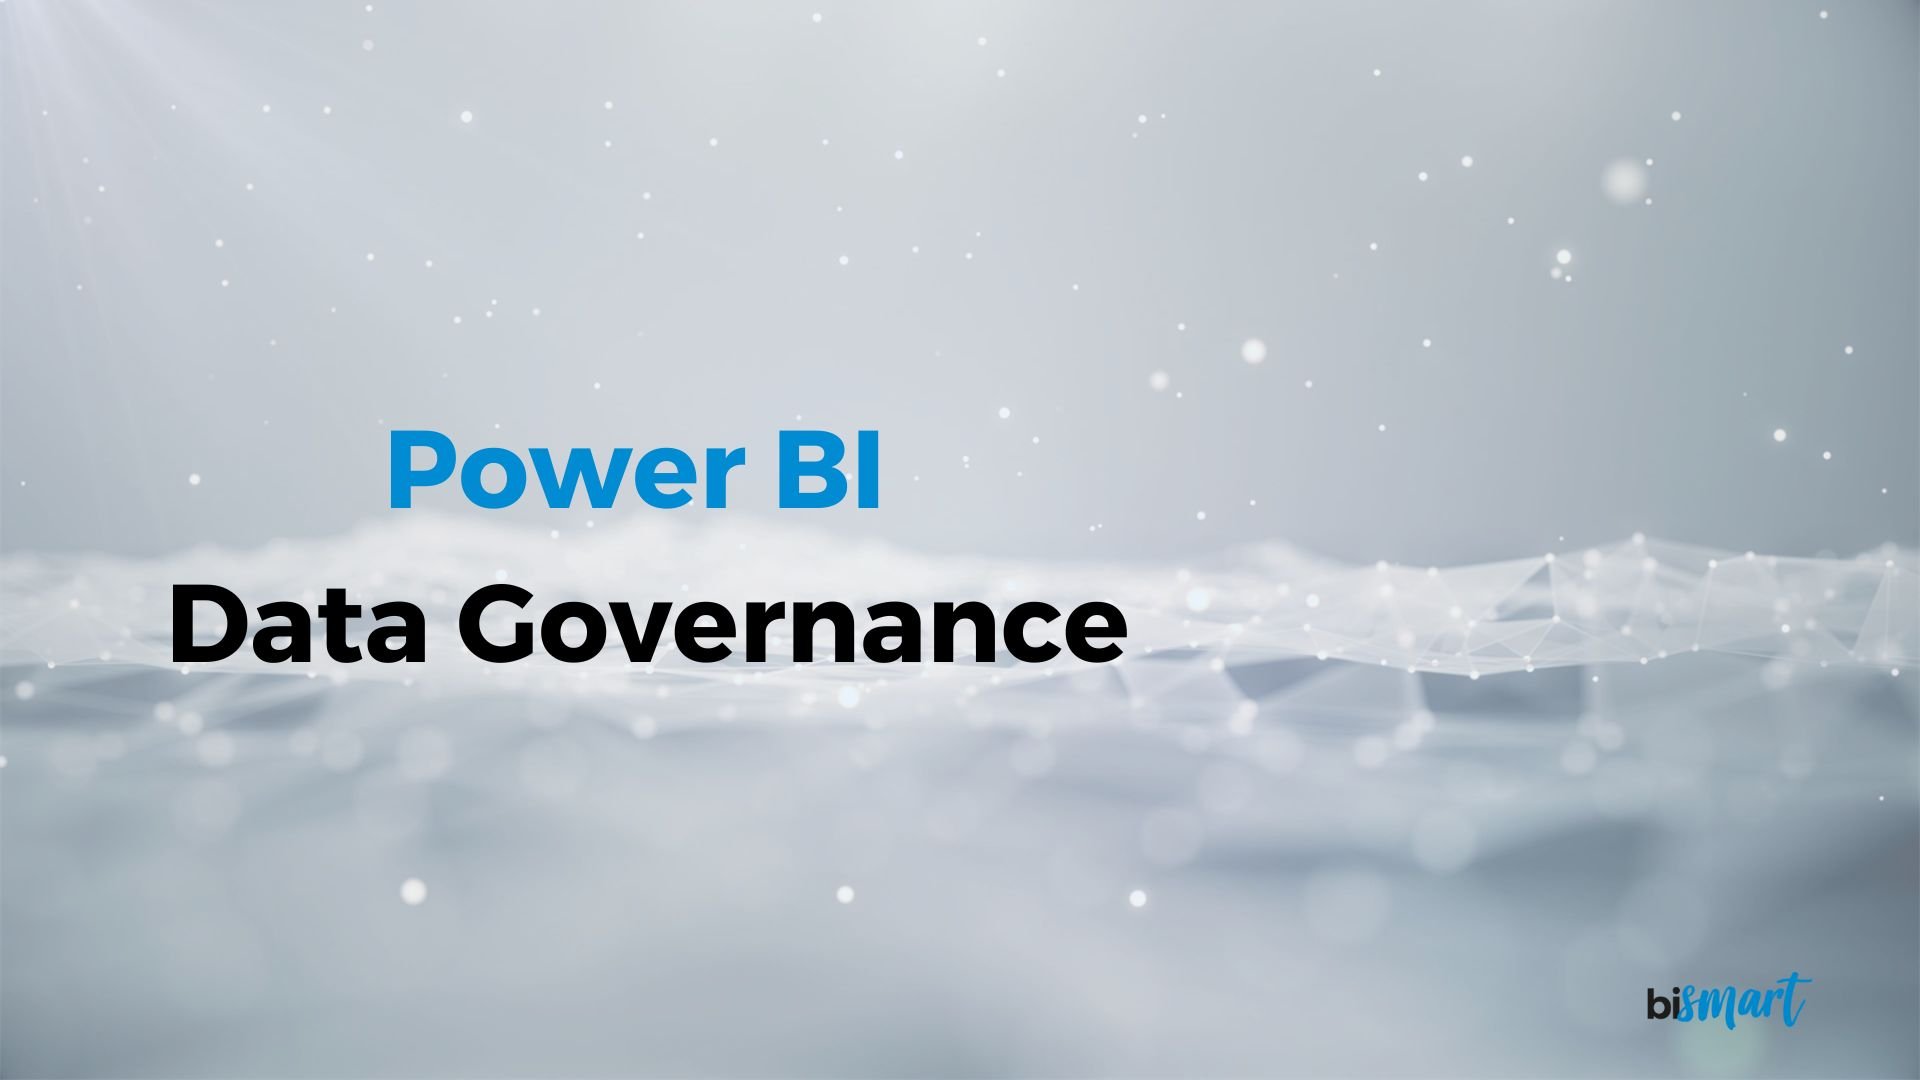 Power BI Data Governance: Management, Control and Security in Power BI